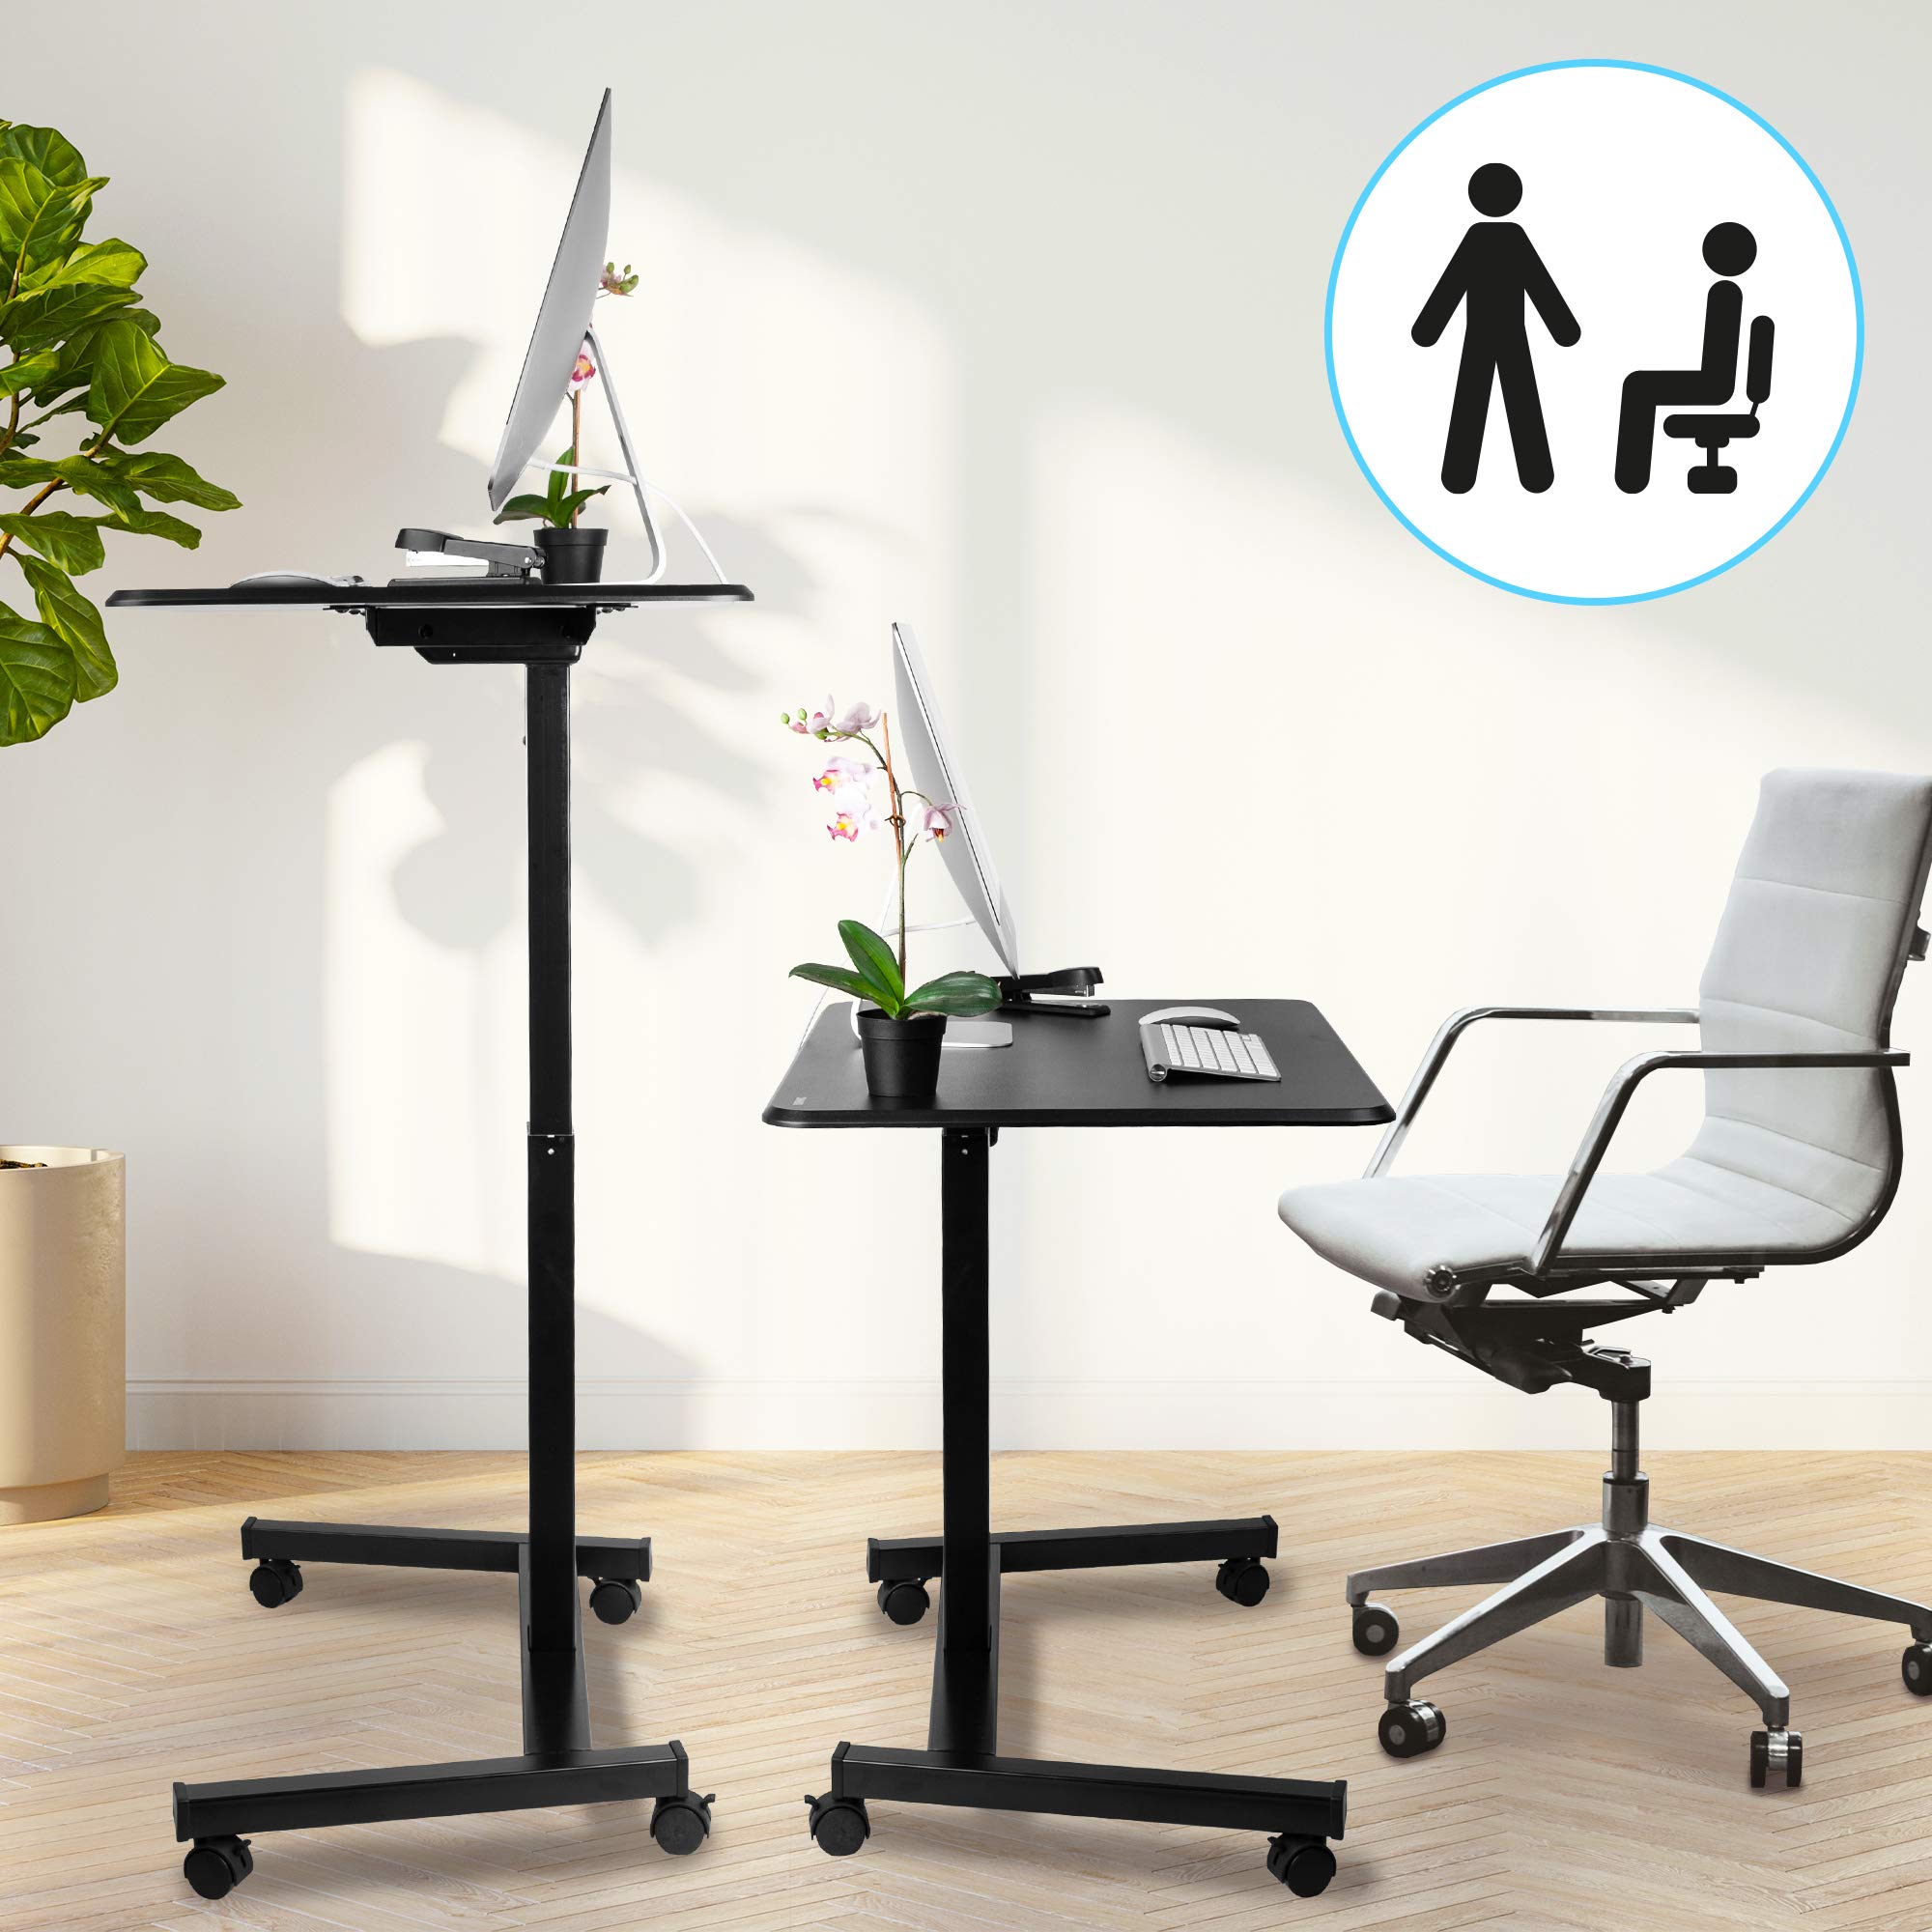 Duronic Sit-Stand Desk WPS47 | Portable Ergonomic Desk for Laptop | 80x50cm Platform | Multi-Use Video Projector Table on Wheels | Adjustable Height by Handle | 30kg Capacity | Home Office Workspace…